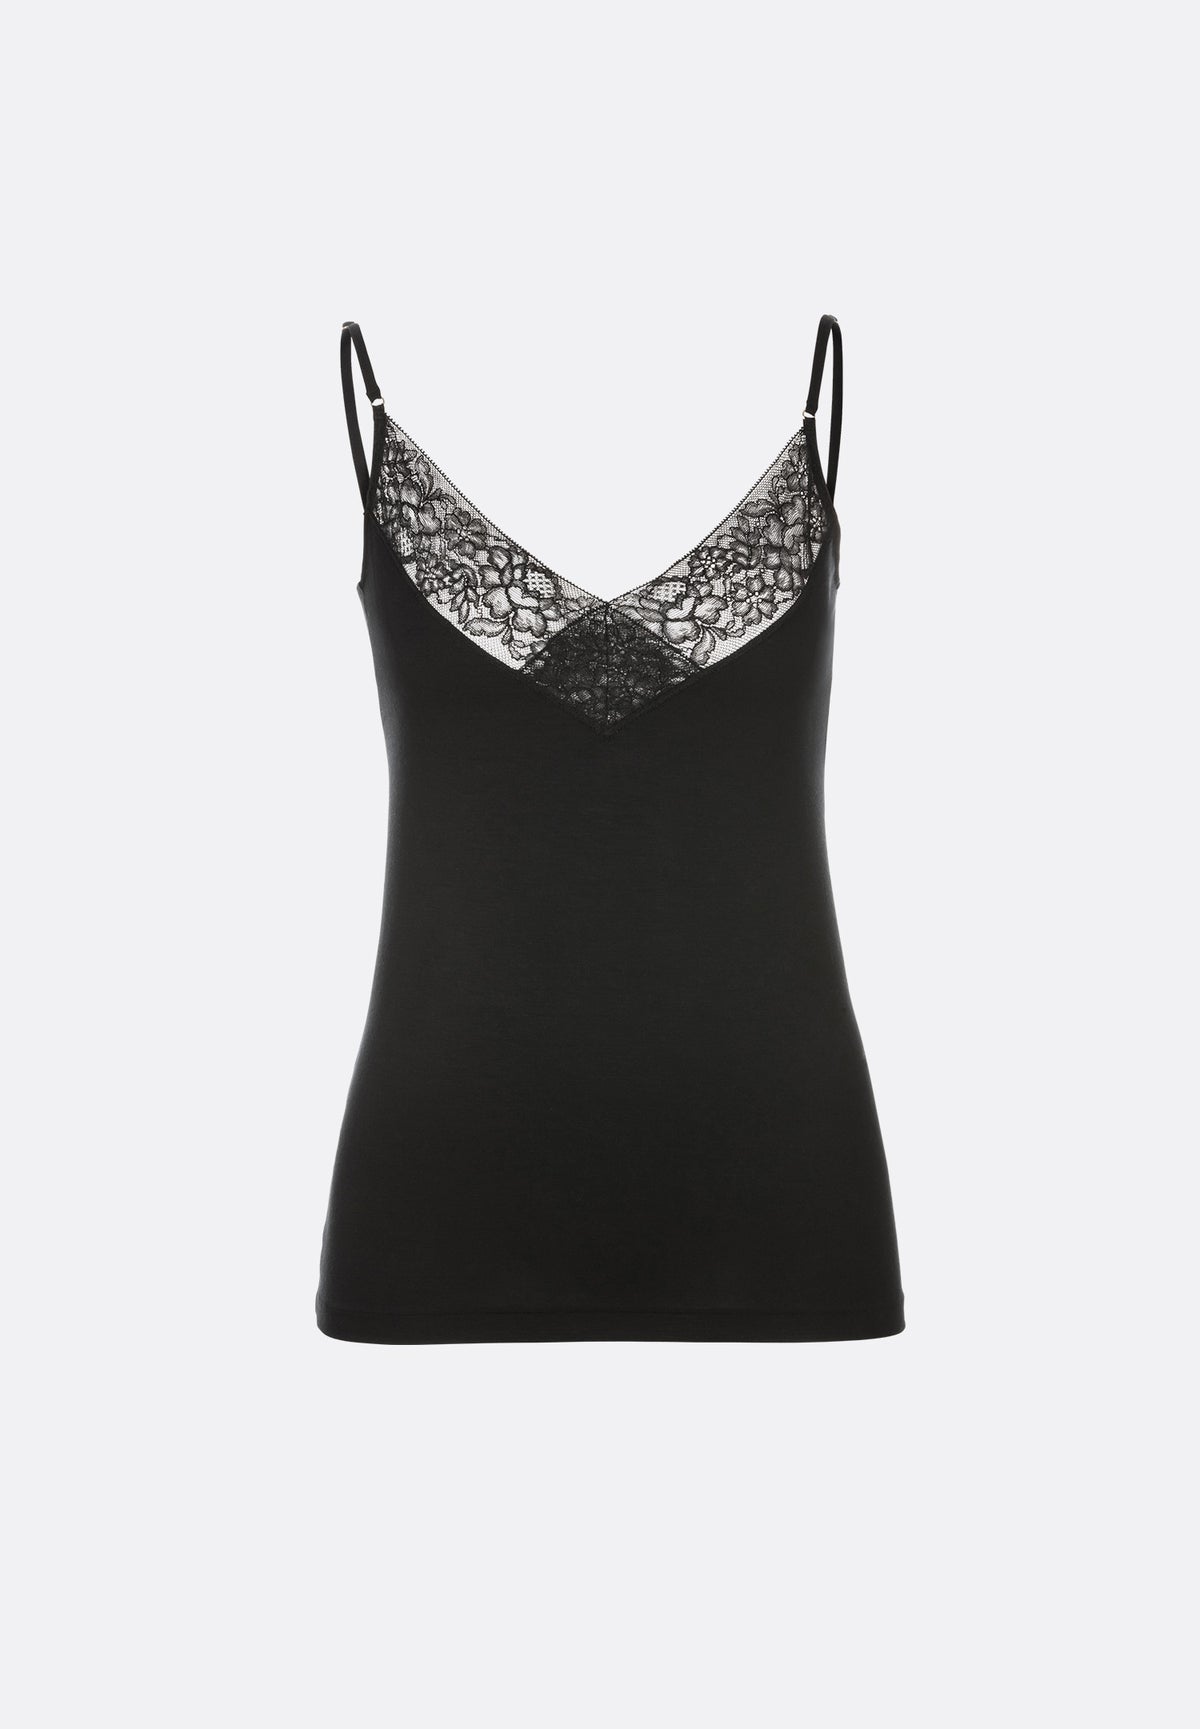 Pureness with Lace | Caraco fines bretelles - black